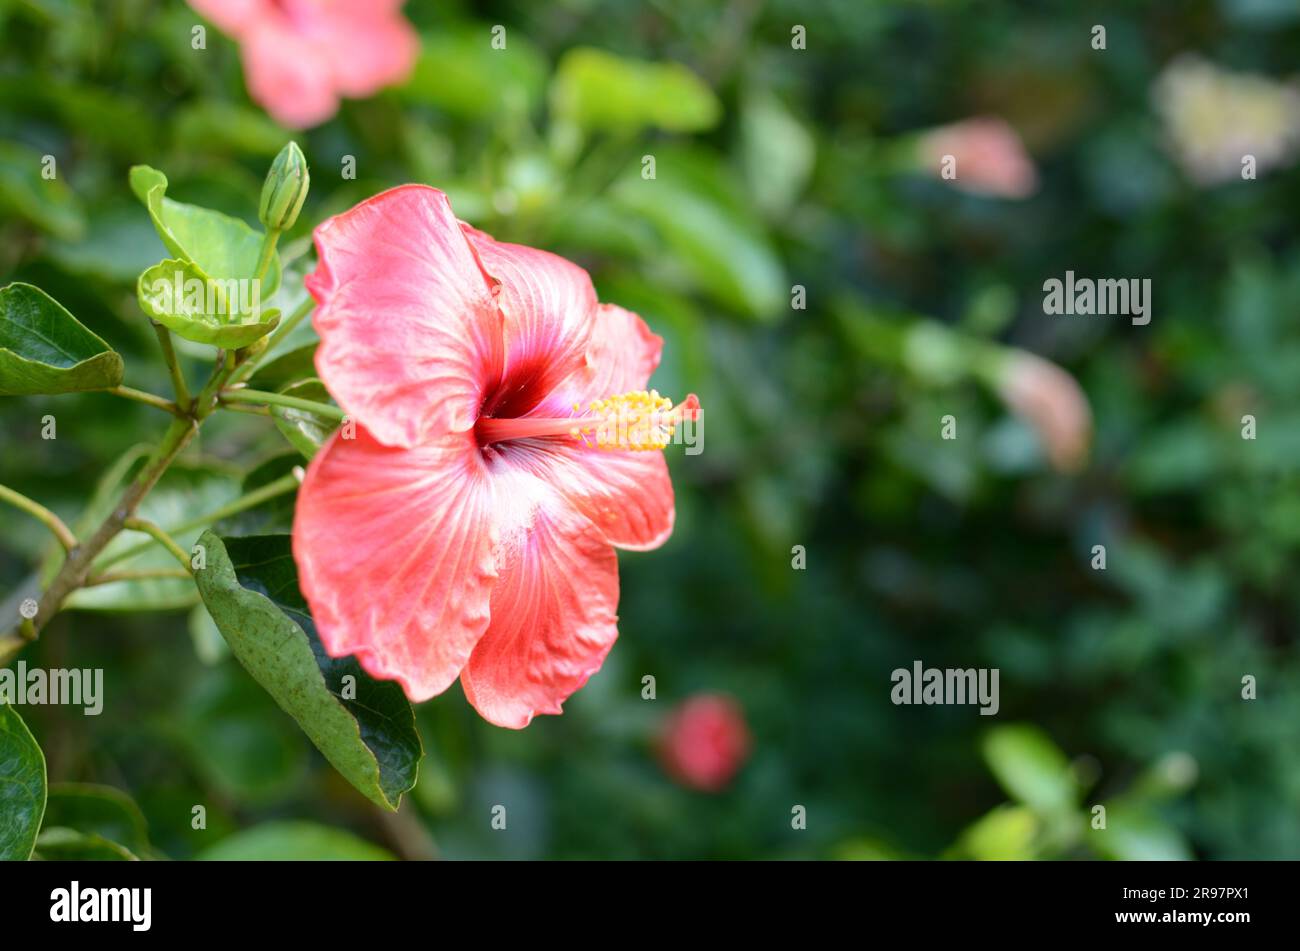 Red Hibiscus Flower In The Auckland Botanic Gardens. Stock Photo